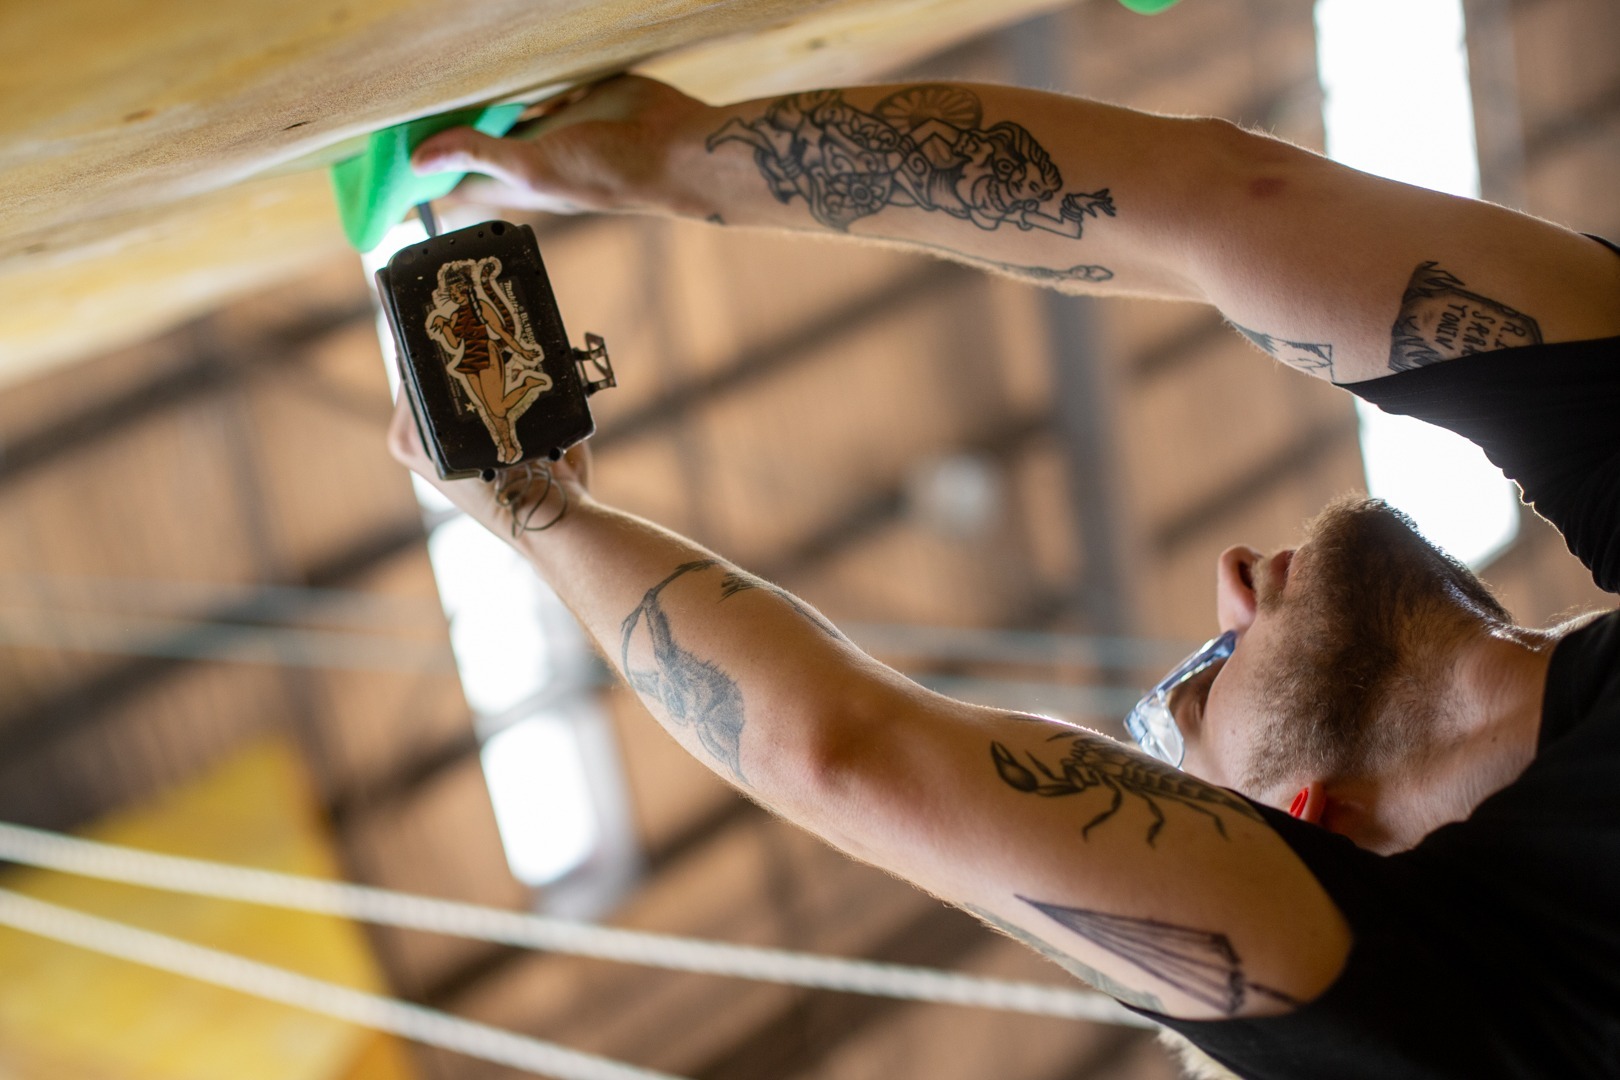 A man with tattoos climbing on a wall.